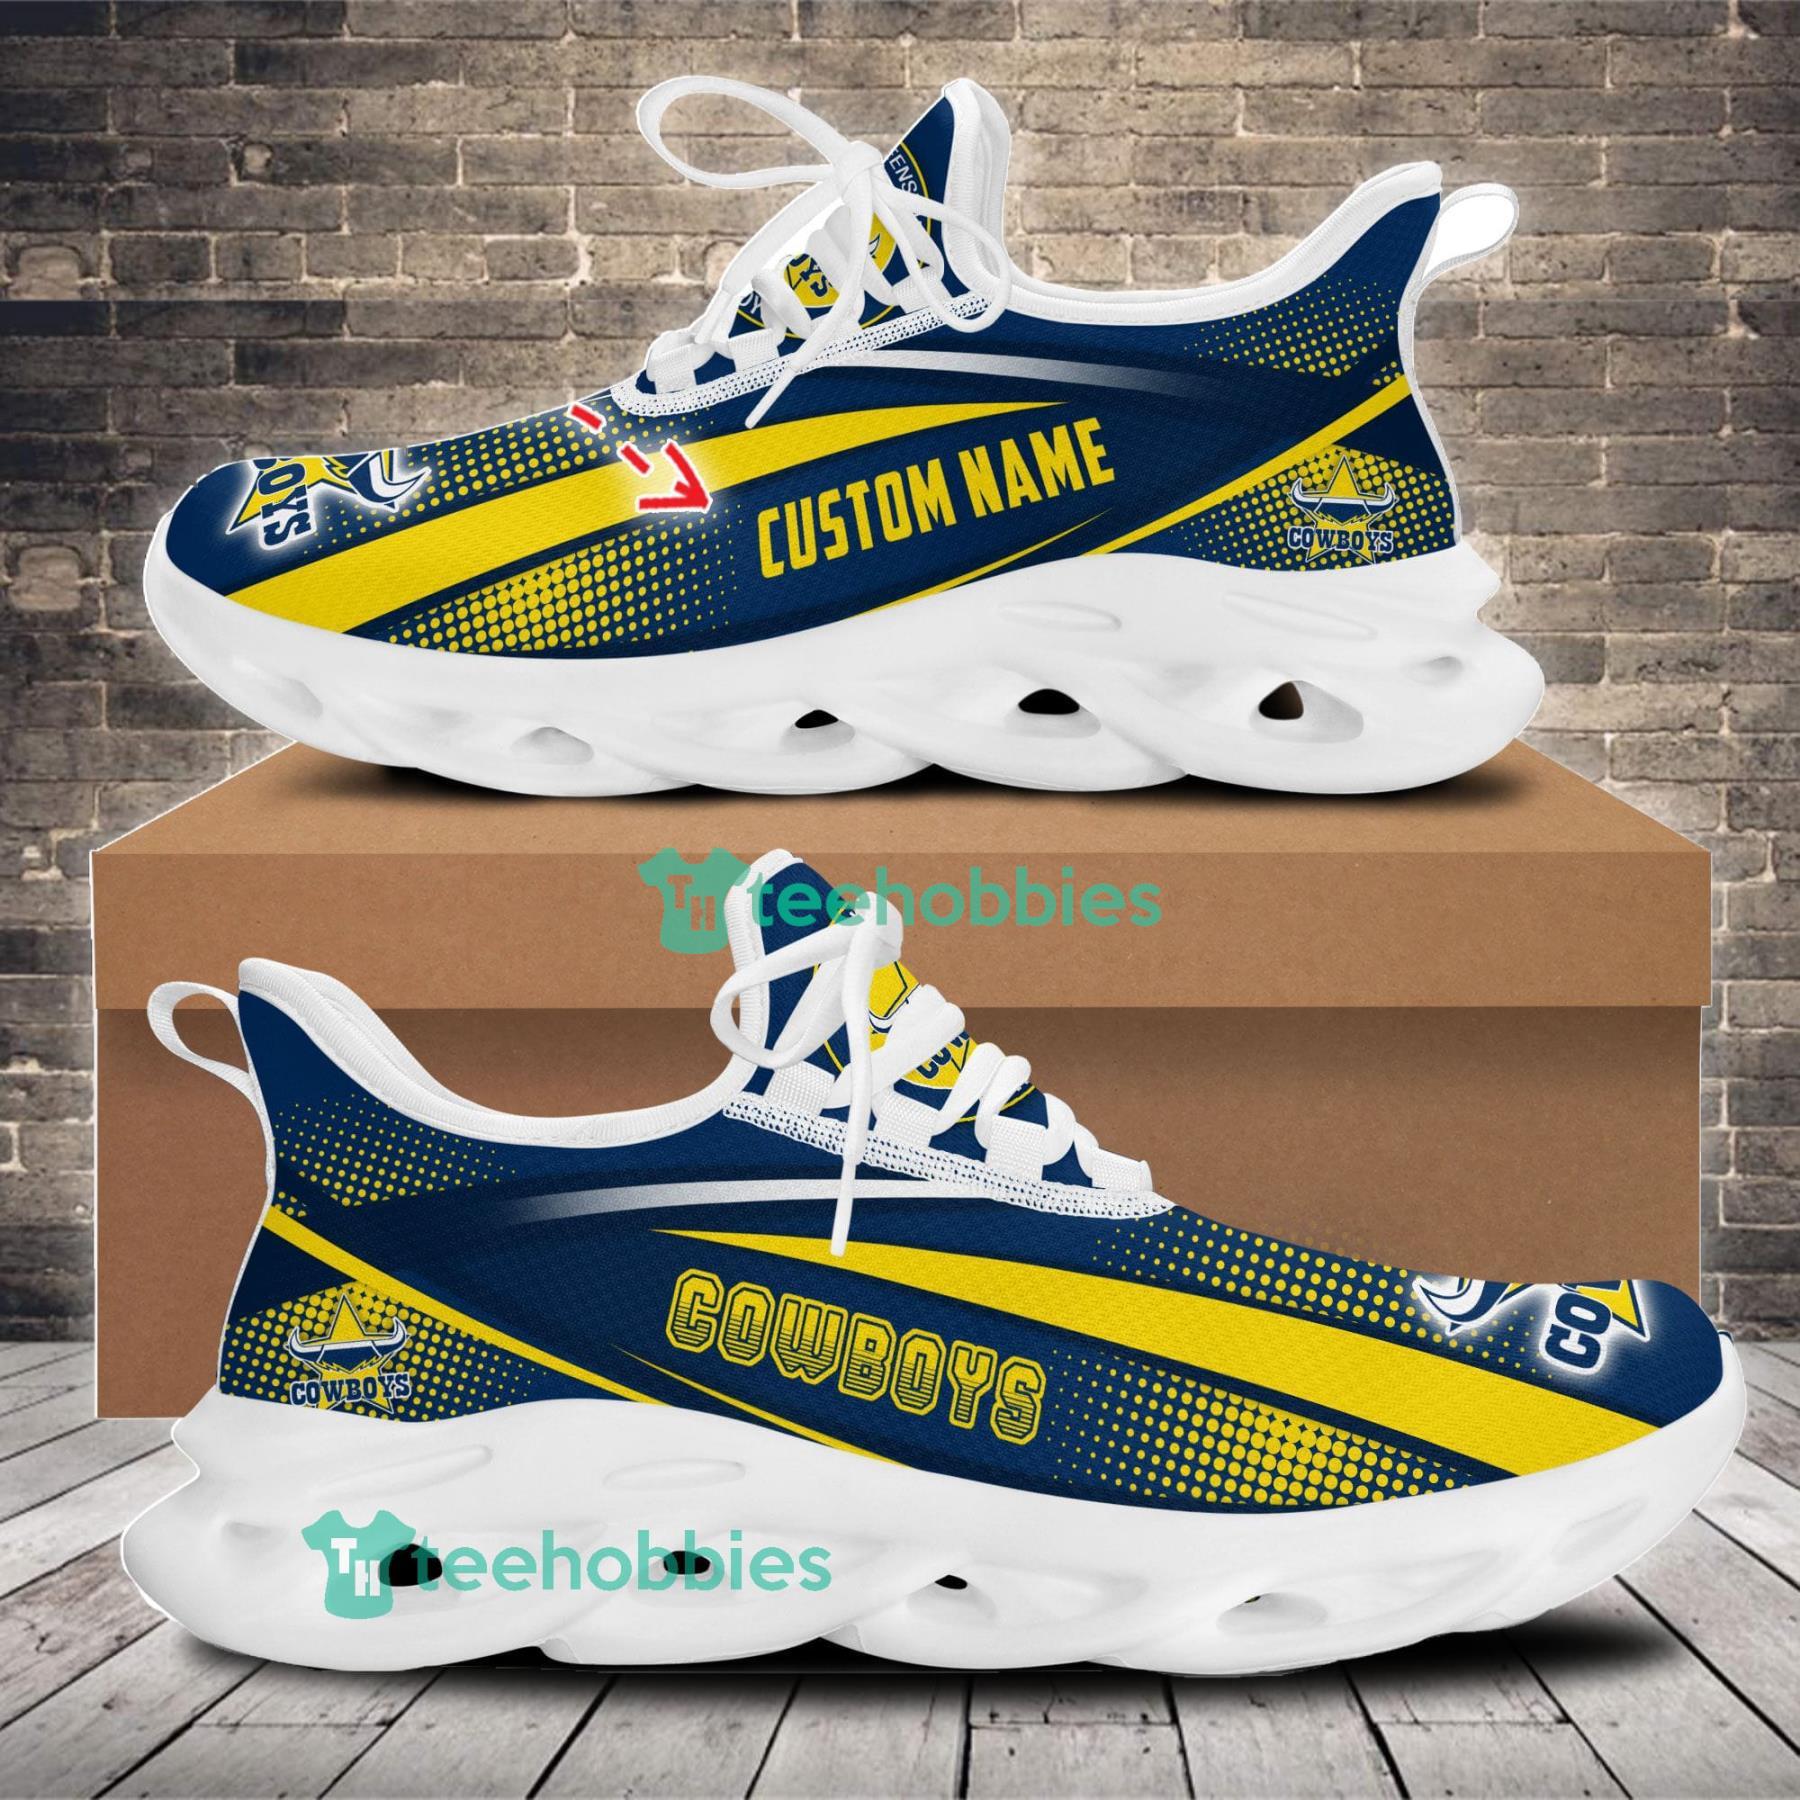 North Queensland Cowboys Sneakers Max Soul Shoes For Men And Women NRL Custom Name For Fans Product Photo 1